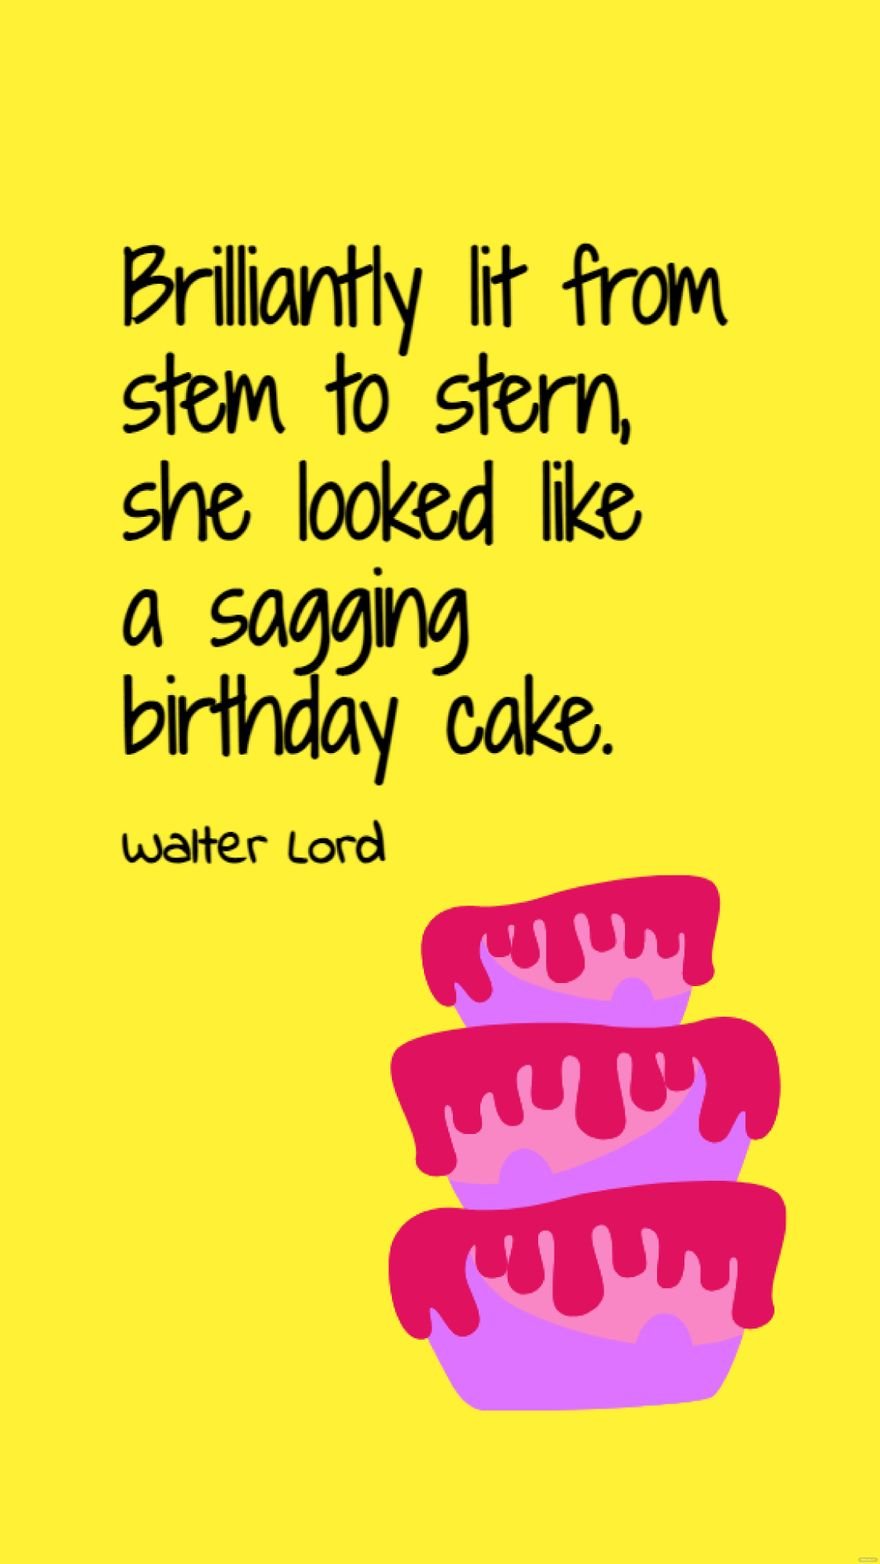 Free Walter Lord - Brilliantly lit from stem to stern, she looked like a sagging birthday cake. in JPG